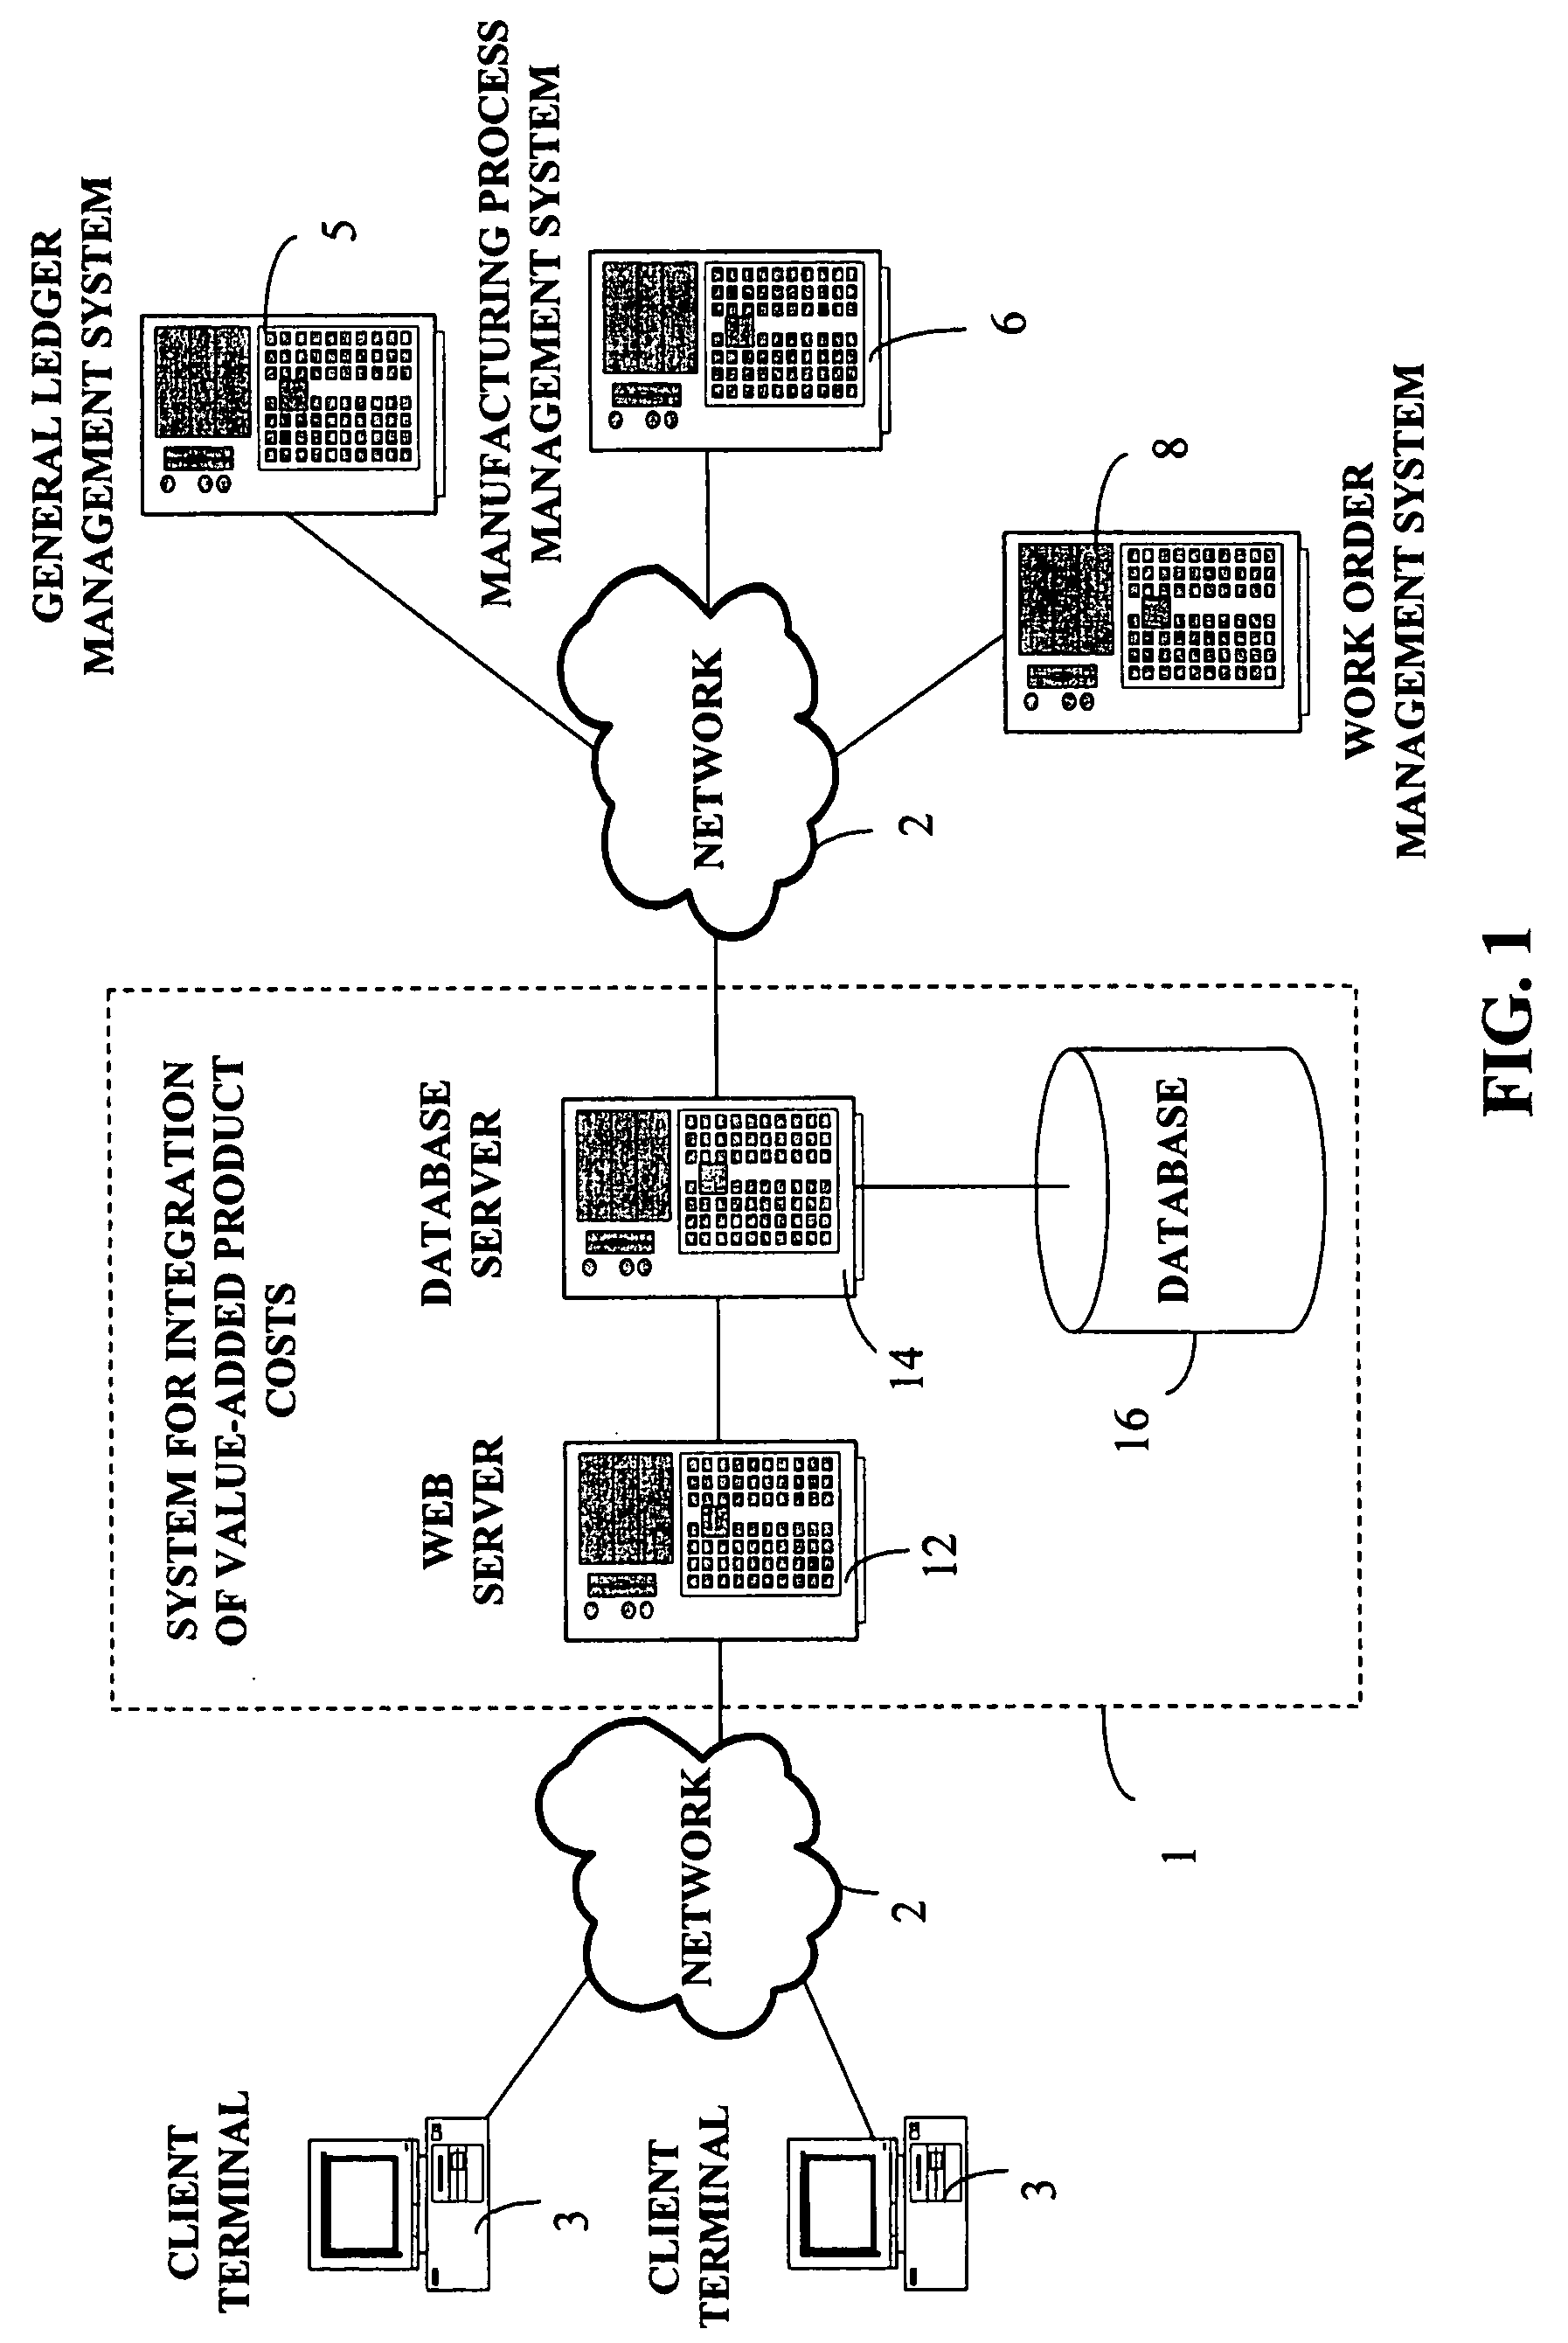 System and method for integration of value-added product costs